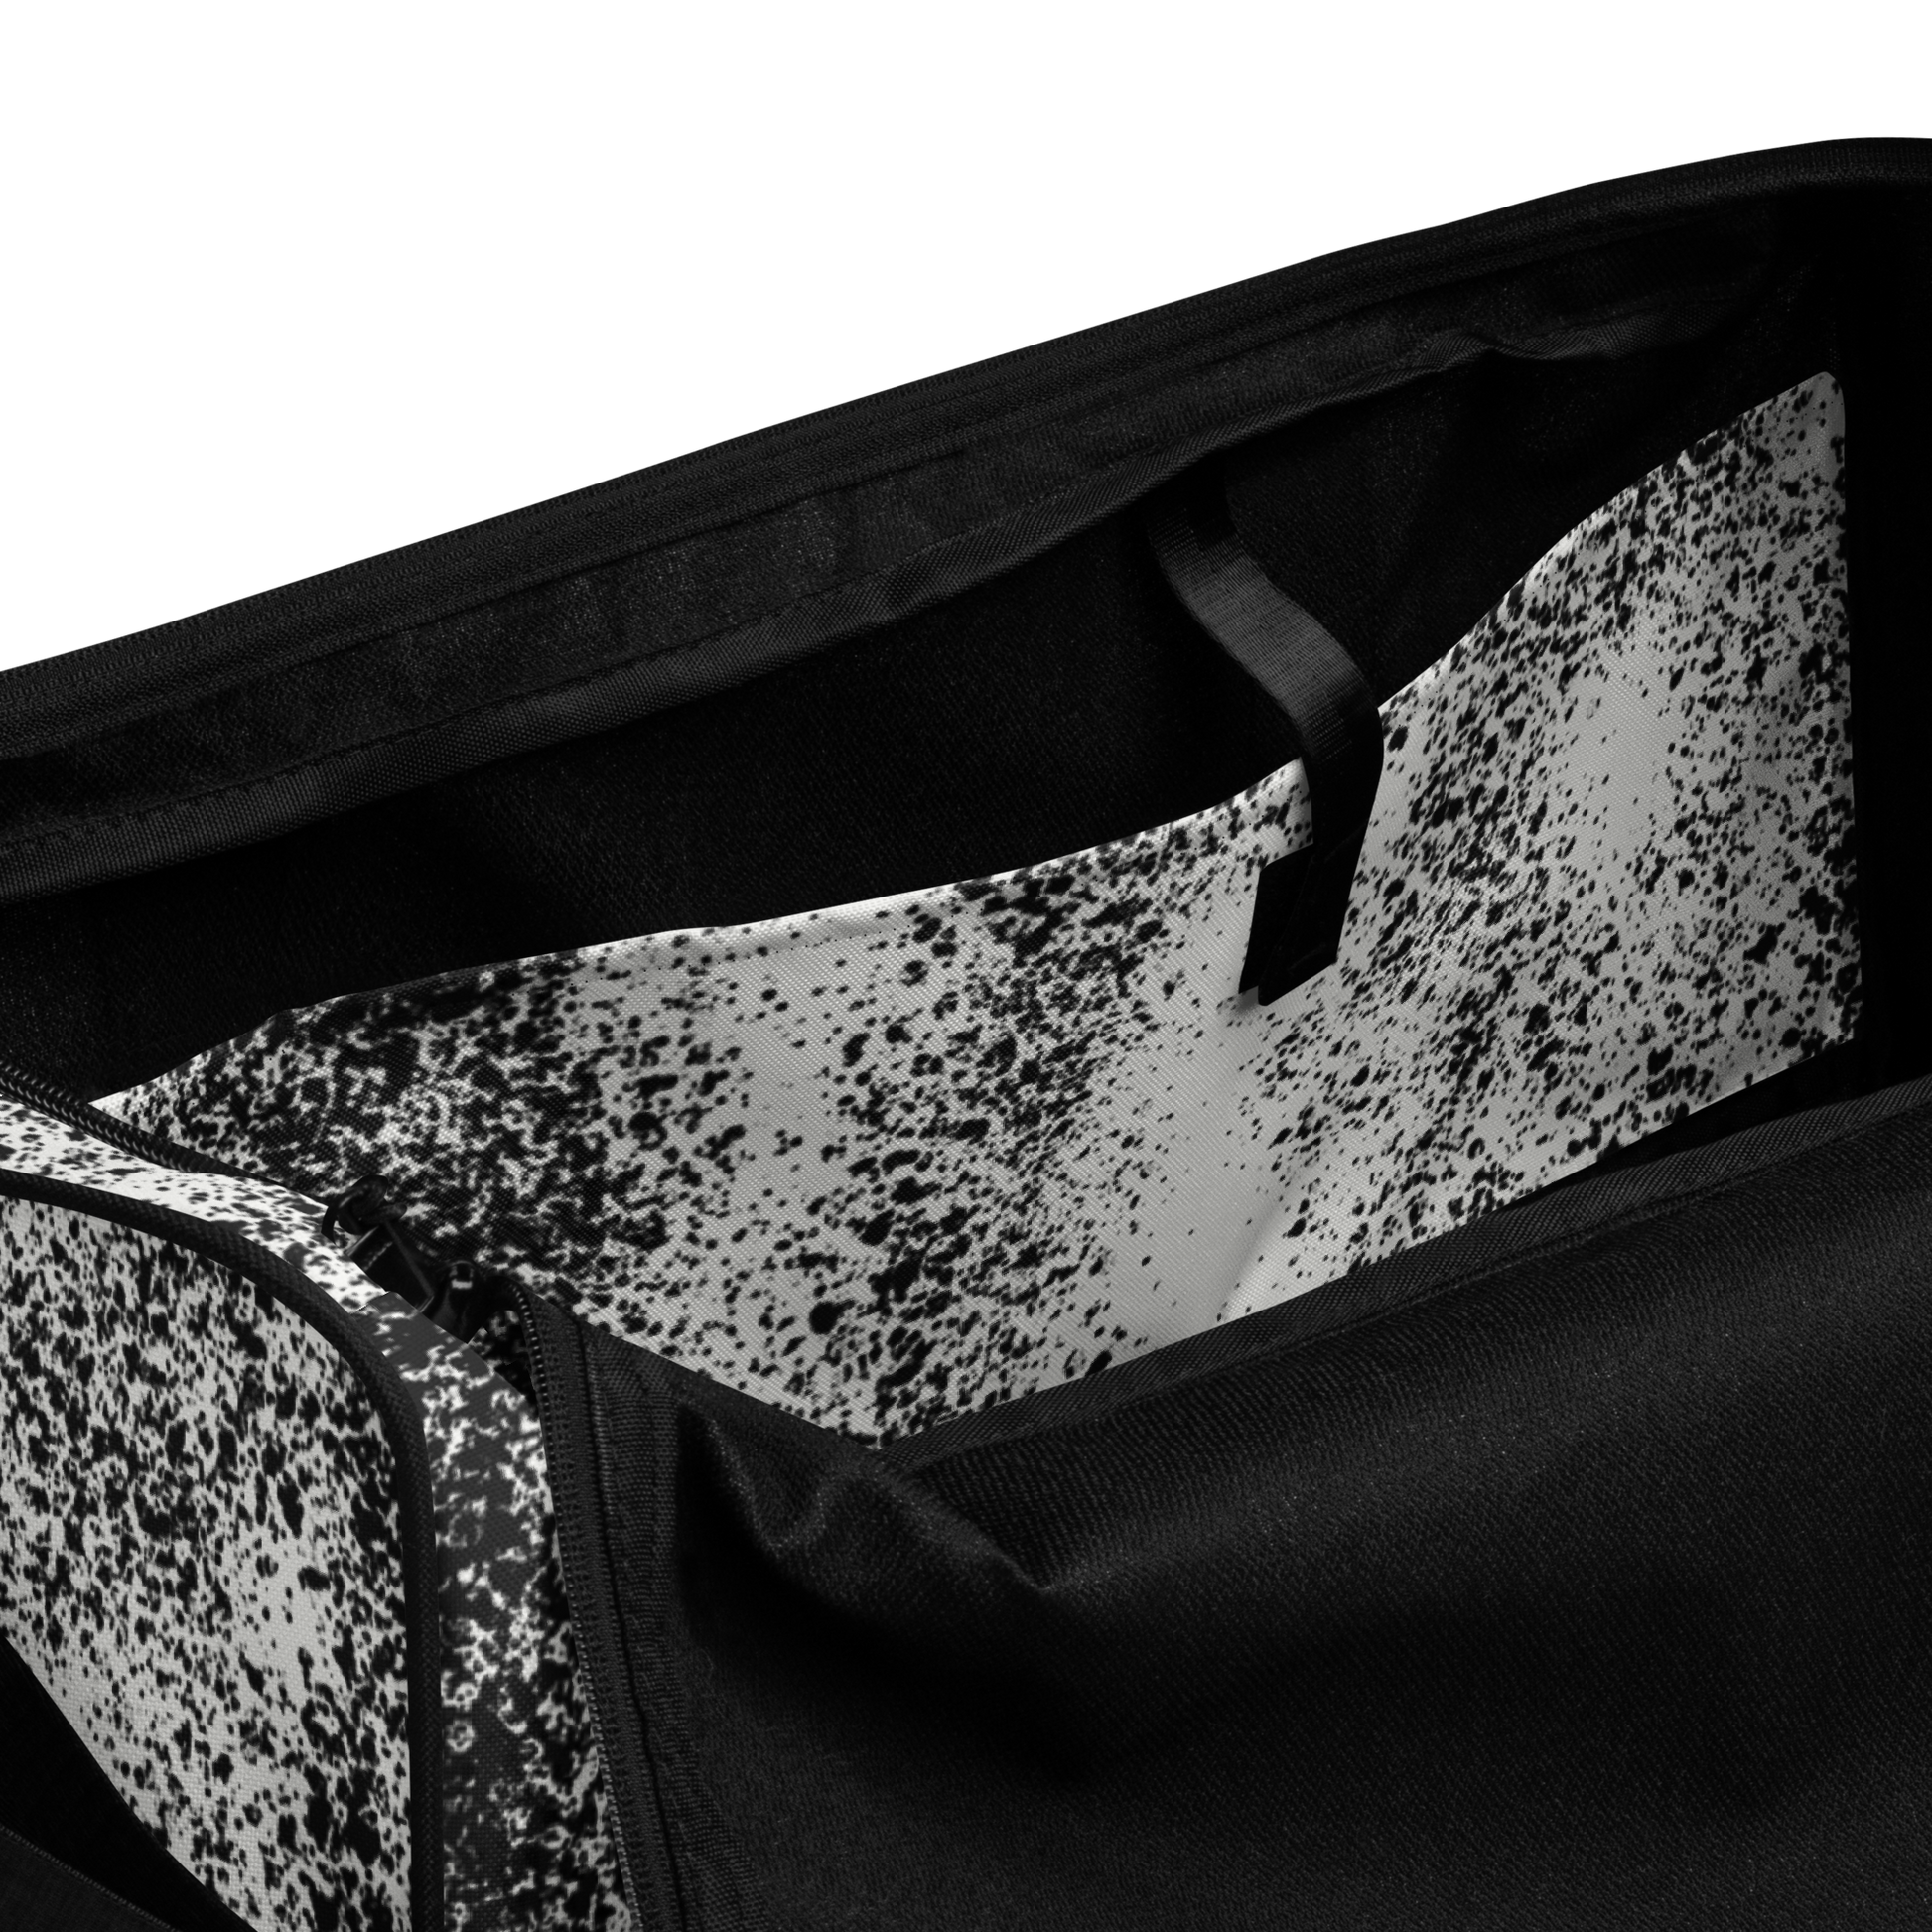 New City Adventure duffle bag in black and white speckle pattern inside pocket